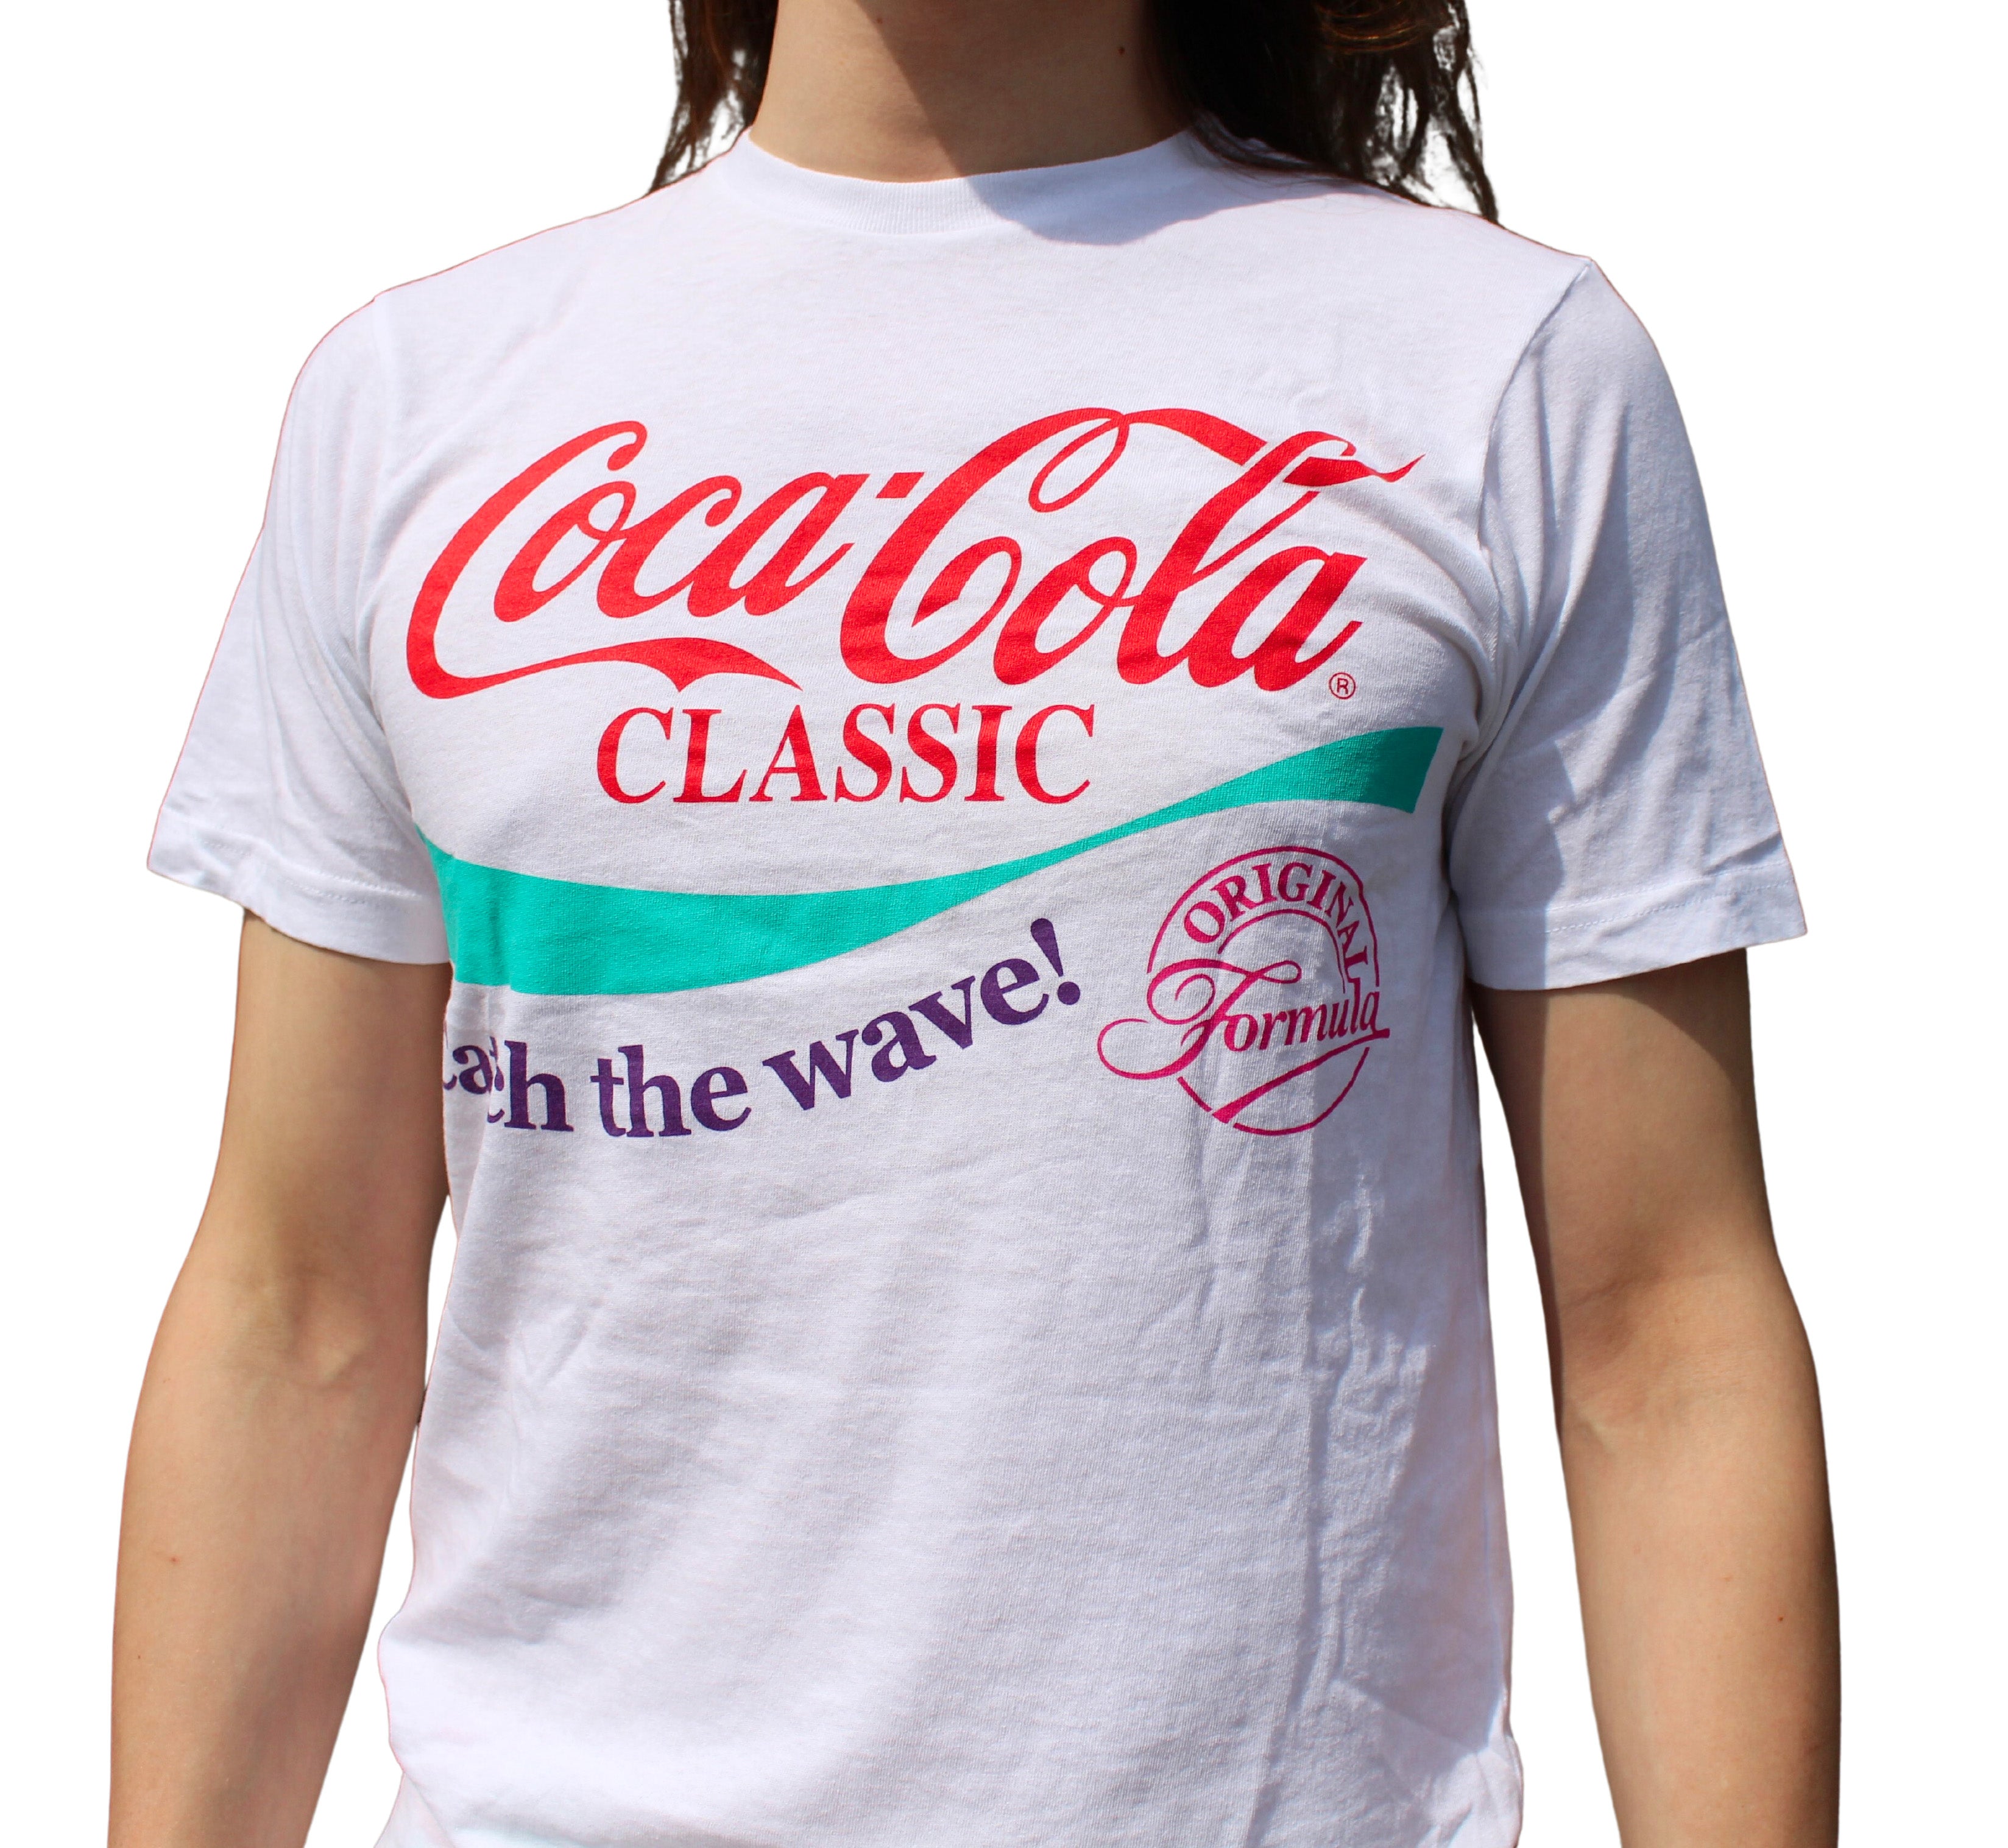 Cocal Cola 90's shirt on model front view 